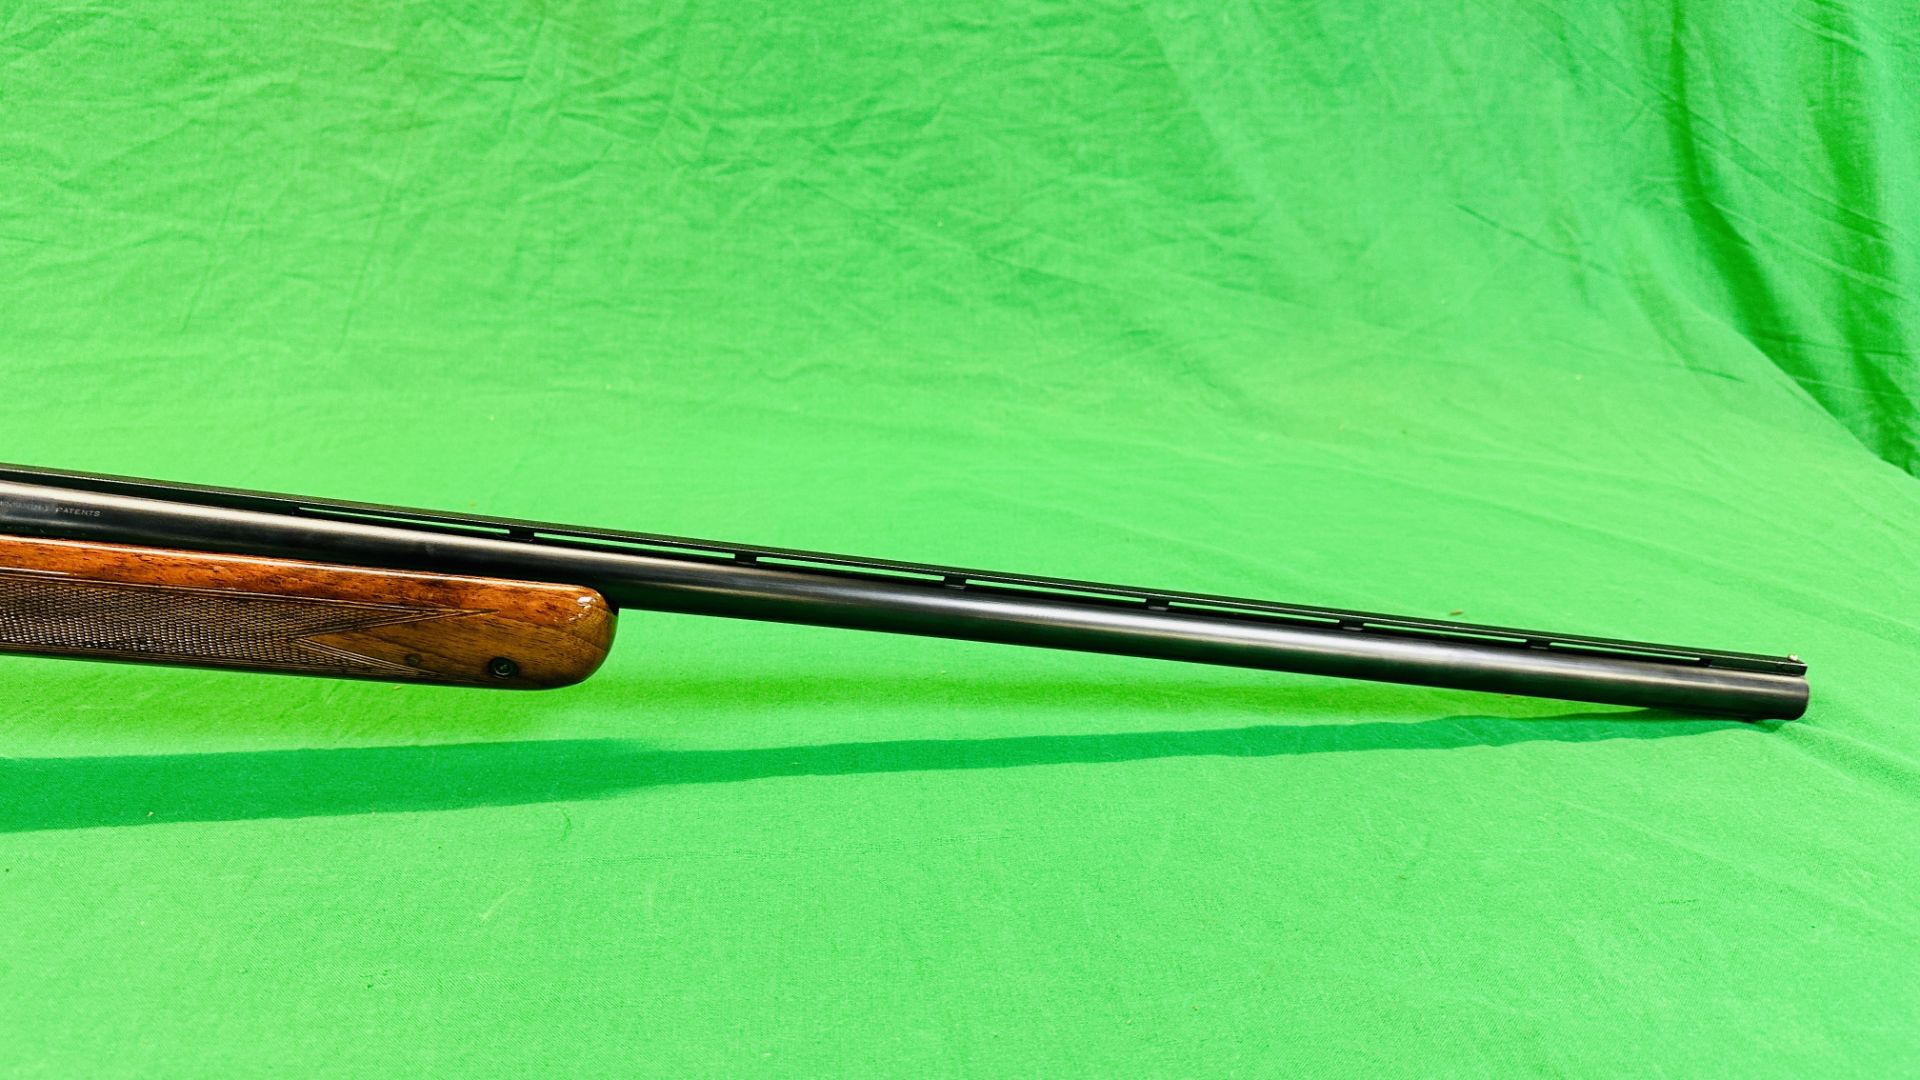 FABRIQUE 12 BORE SELF LOADING TWO SHOT SHOTGUN MODEL "DOUBLE TWO" #C23651 29 INCH BARREL VENTILATED - Image 5 of 15